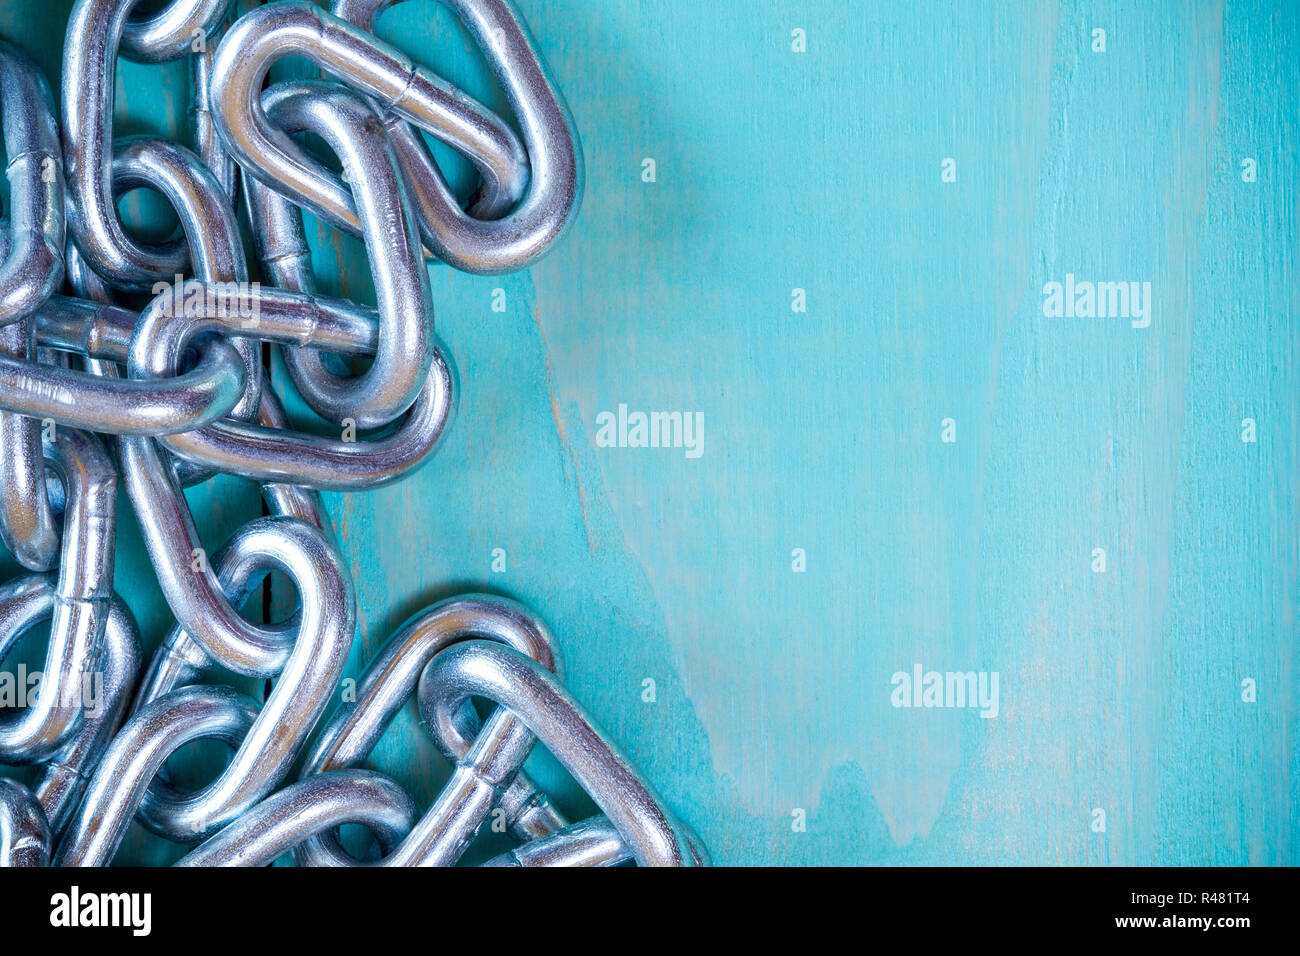 Metal chain on nice wooden background Stock Photo